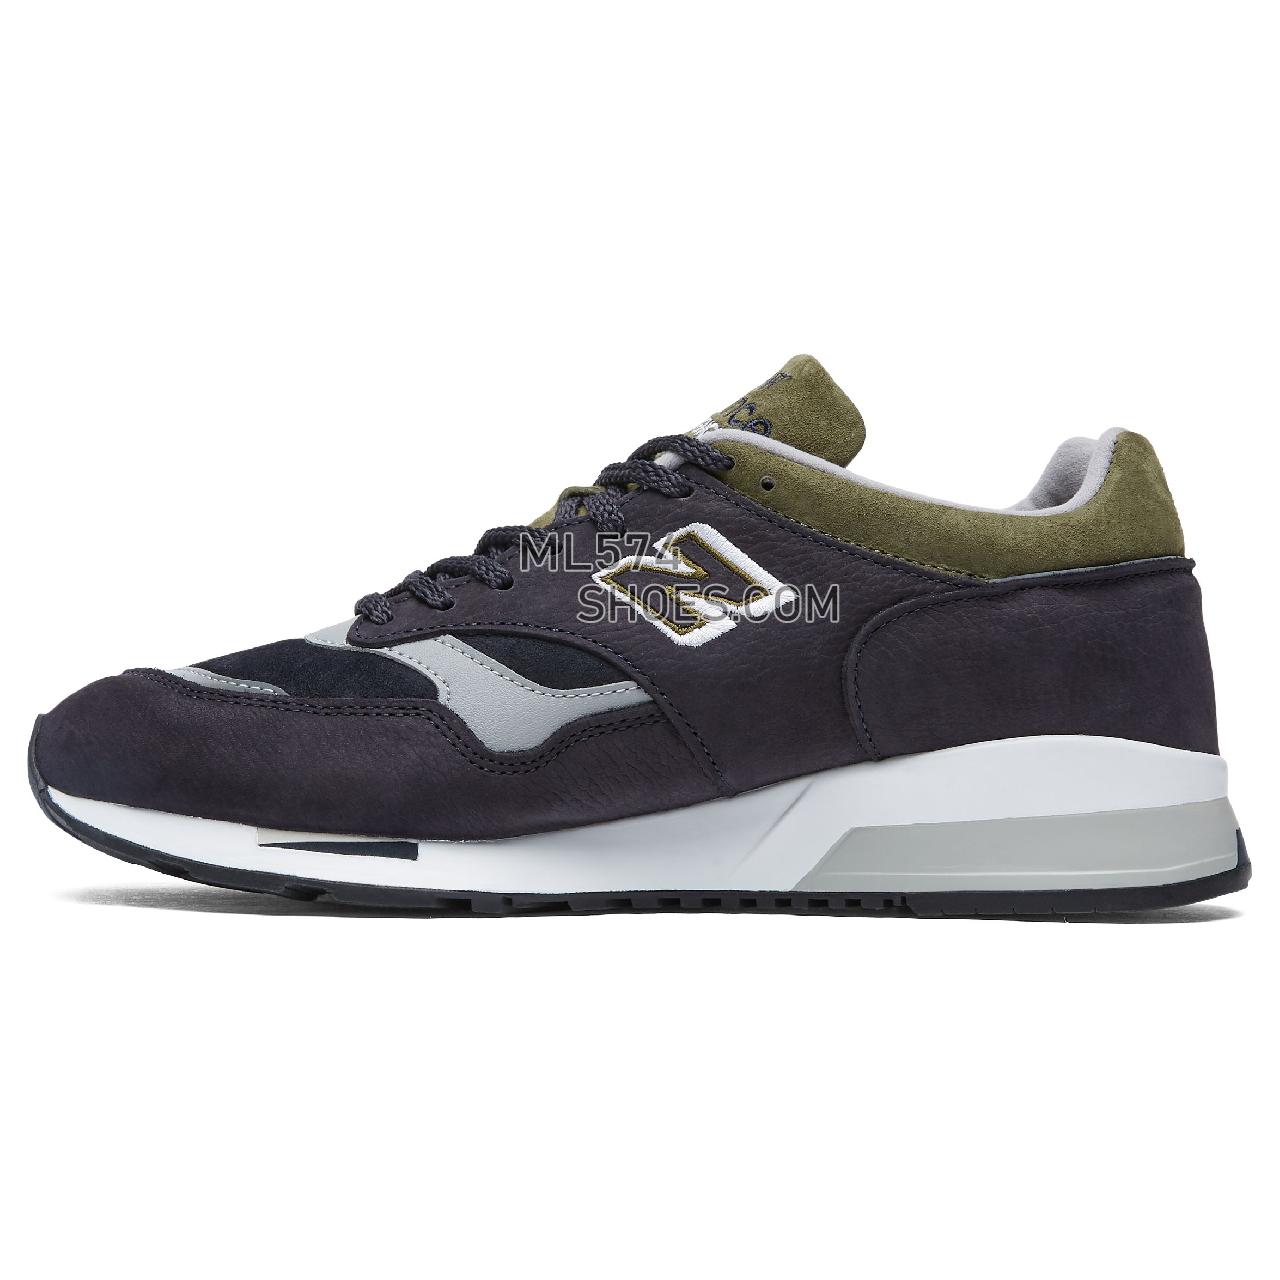 New Balance Made in UK 1500 - Men's Made in USA And UK Sneakers - Navy with Slate Green and Grey - M1500NAG